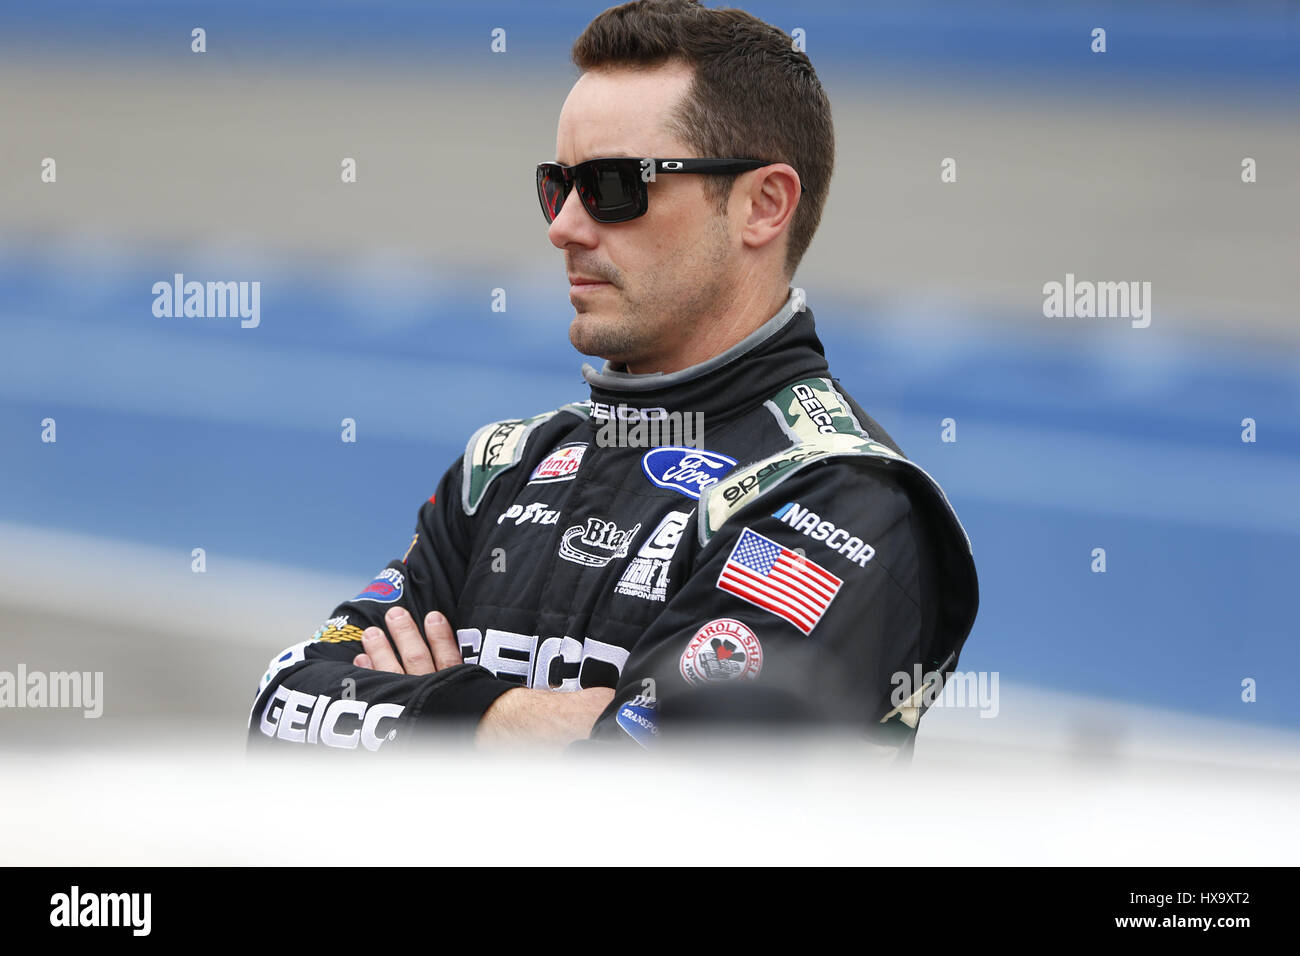 Fontana, California, USA. 25th Mar, 2017. March 25, 2017 - Fontana, California, USA: Casey Mears (98) hangs out on pit road during qualifying for the NASCAR Xfinity Series NXS 300 at Auto Club Speedway in Fontana, California. Credit: Justin R. Noe Asp Inc/ASP/ZUMA Wire/Alamy Live News Stock Photo